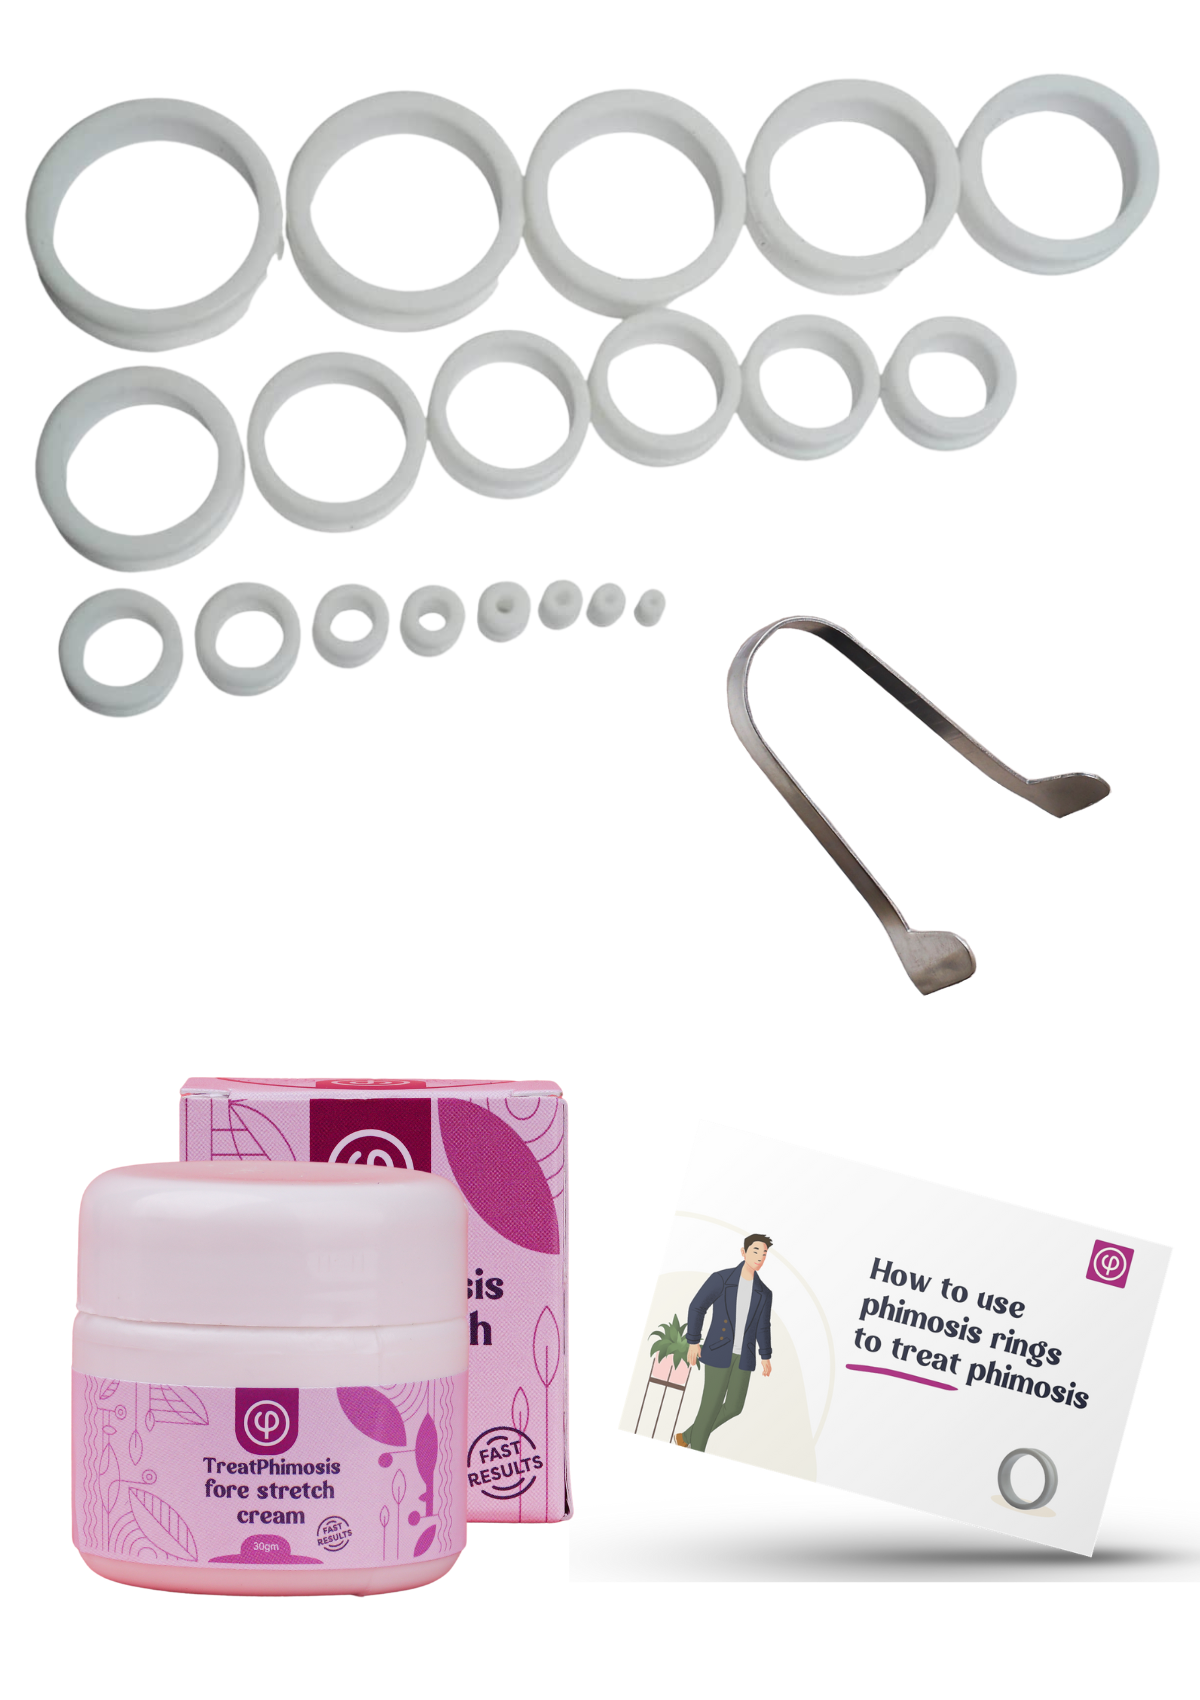 PHIMOSTRETCH PHIMOSIS STRETCHER RINGS KIT FOR TIGHT FORESKIN TREATMENT AND  CURE